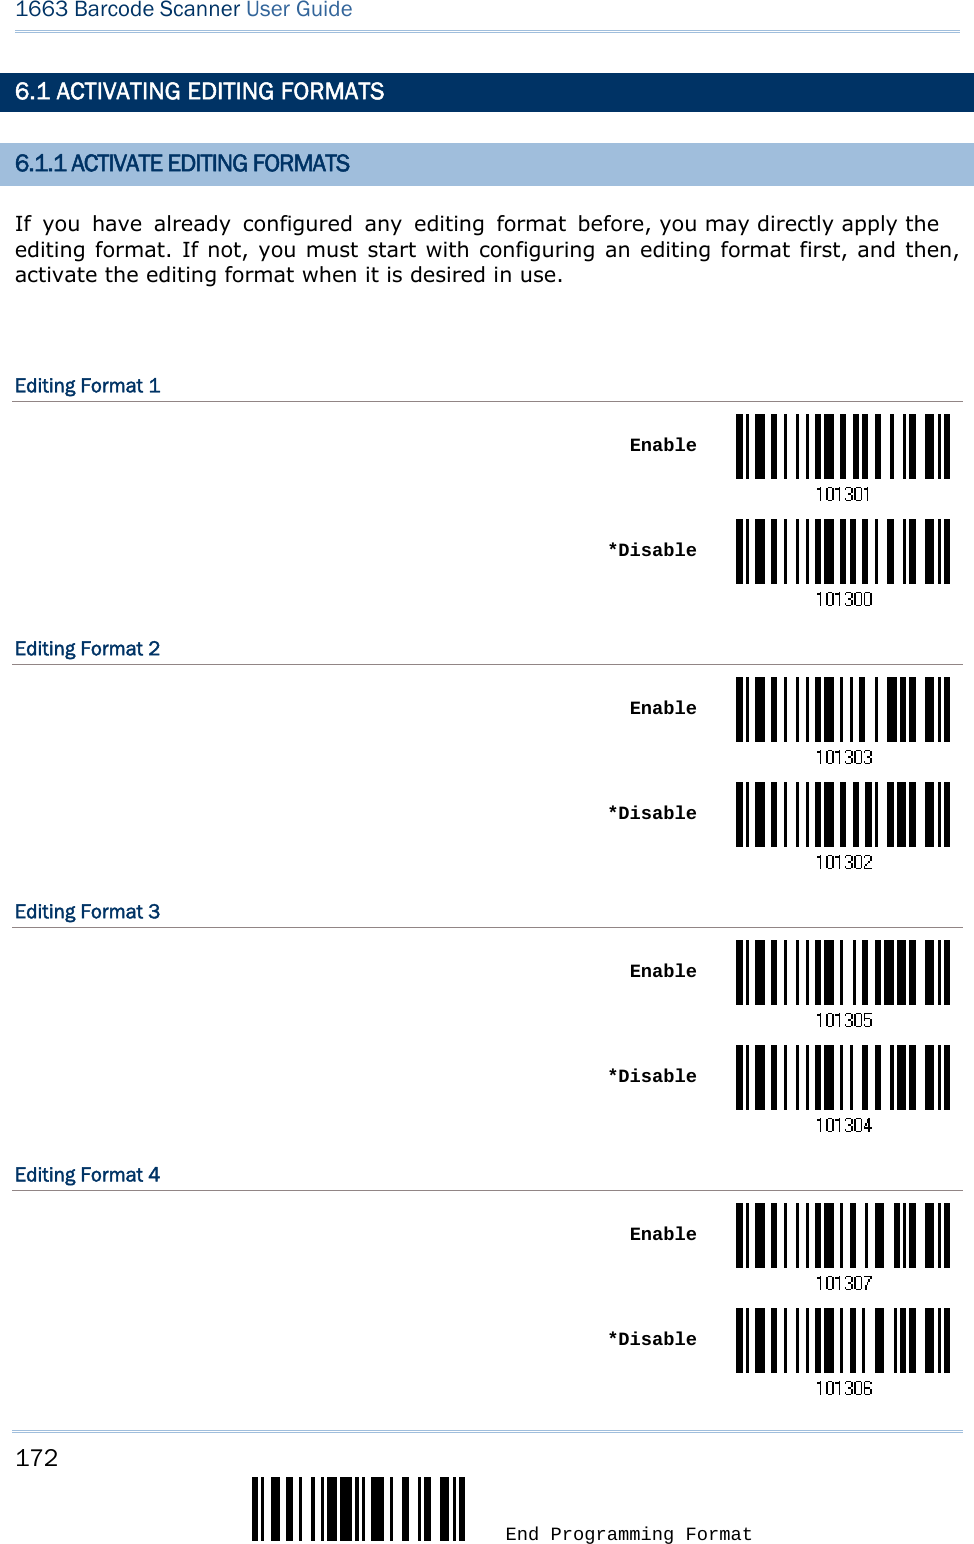 172  End Programming Format 1663 Barcode Scanner User Guide  6.1 ACTIVATING EDITING FORMATS 6.1.1 ACTIVATE EDITING FORMATS If you have already configured any editing format before, you may directly apply the  editing format. If not, you must start with configuring an editing format first, and then, activate the editing format when it is desired in use.  Editing Format 1  Enable *DisableEditing Format 2  Enable *DisableEditing Format 3  Enable *DisableEditing Format 4  Enable *Disable